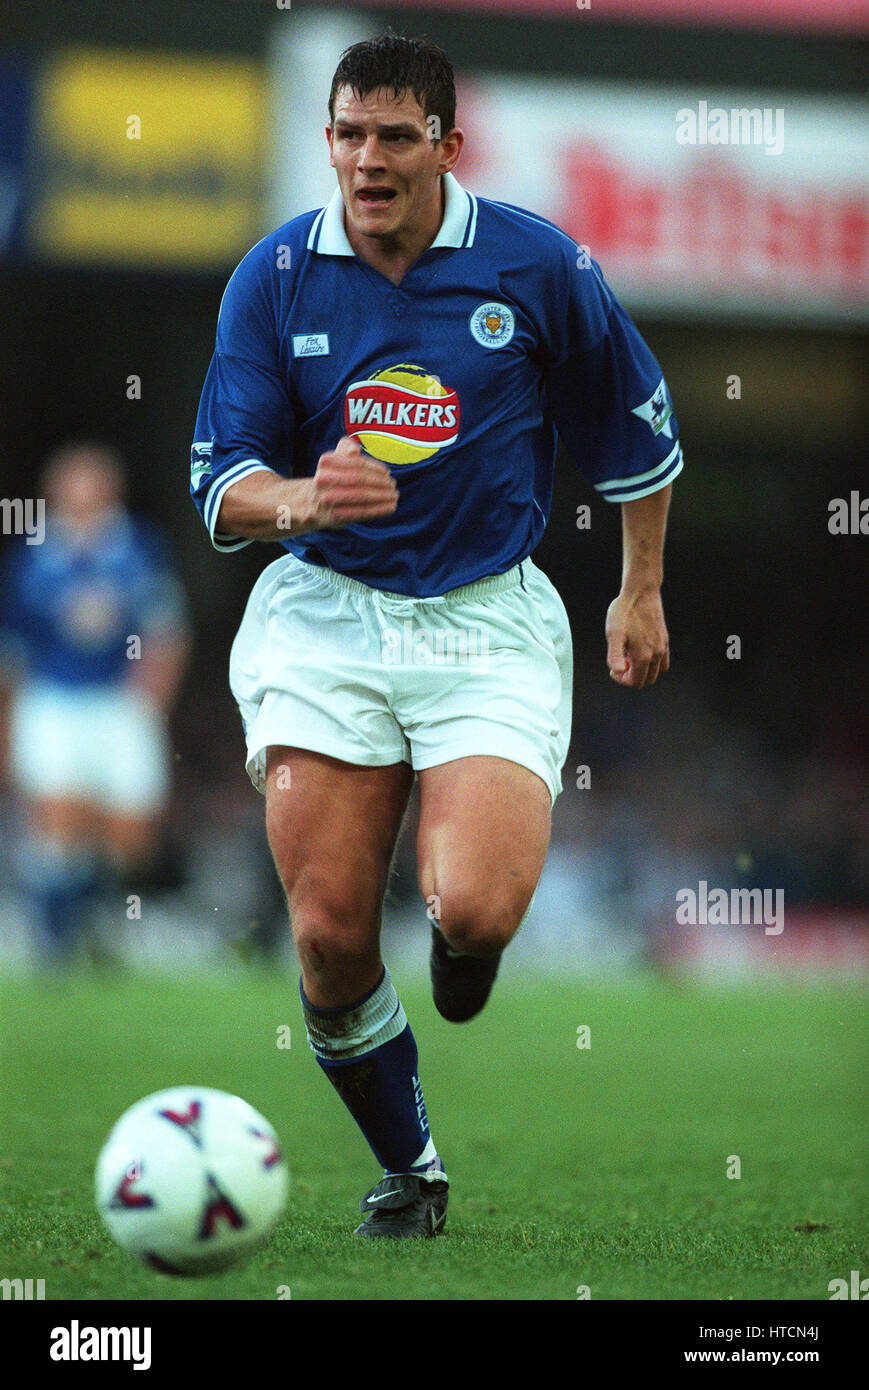 PHIL GILCHRIST LEICESTER CITY FC 29. Dezember 1999 Stockfoto